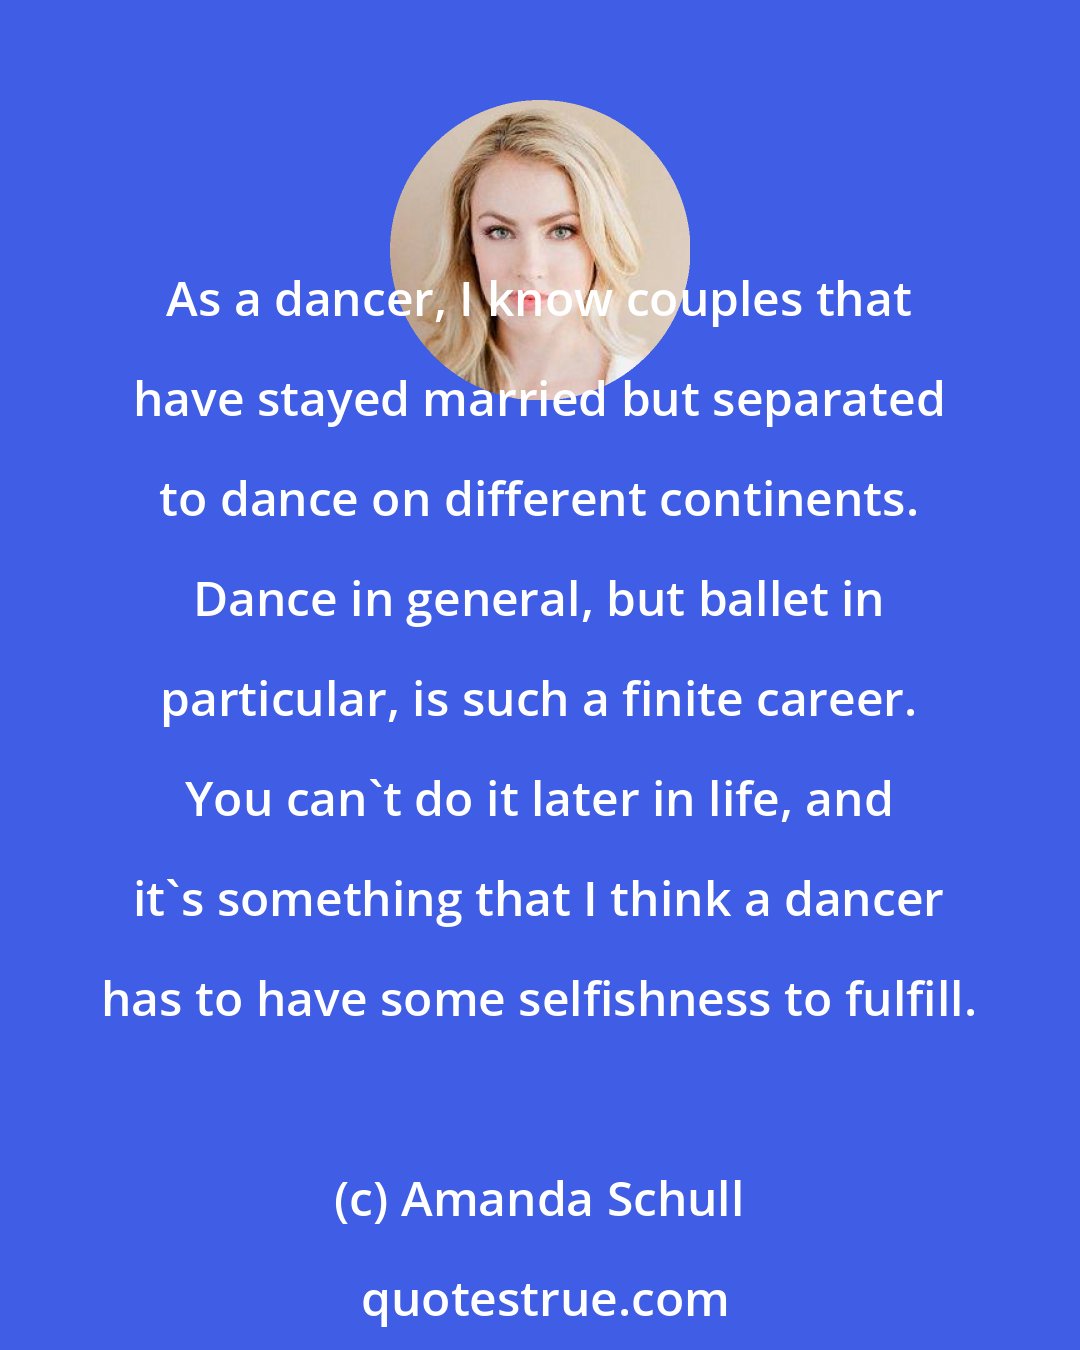 Amanda Schull: As a dancer, I know couples that have stayed married but separated to dance on different continents. Dance in general, but ballet in particular, is such a finite career. You can't do it later in life, and it's something that I think a dancer has to have some selfishness to fulfill.